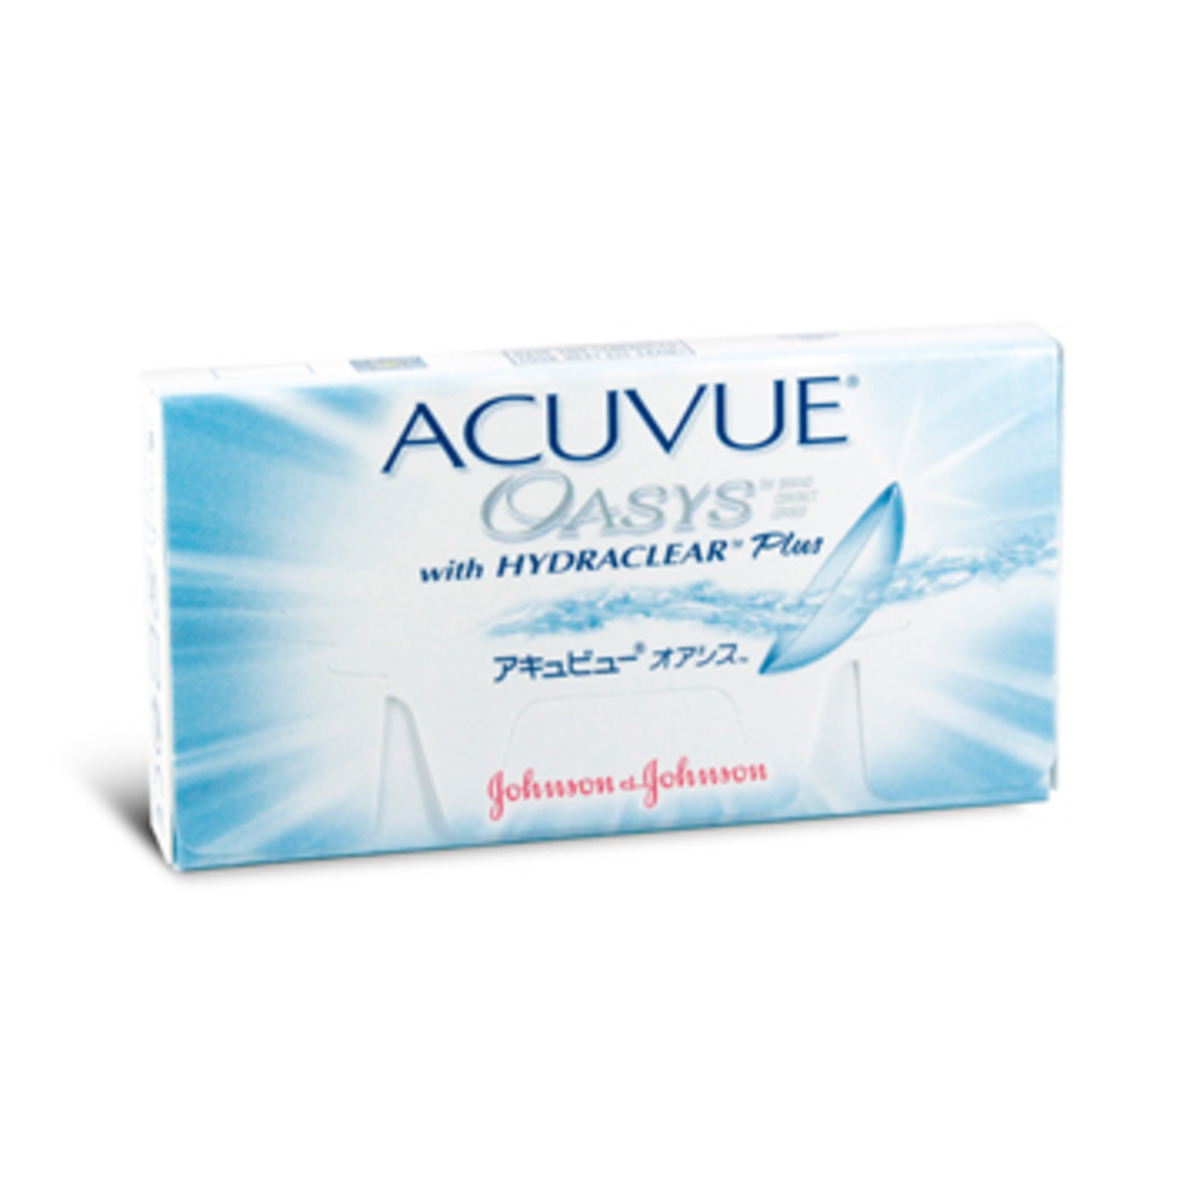 acuvue-oasys-with-hydraclear-plus-6l